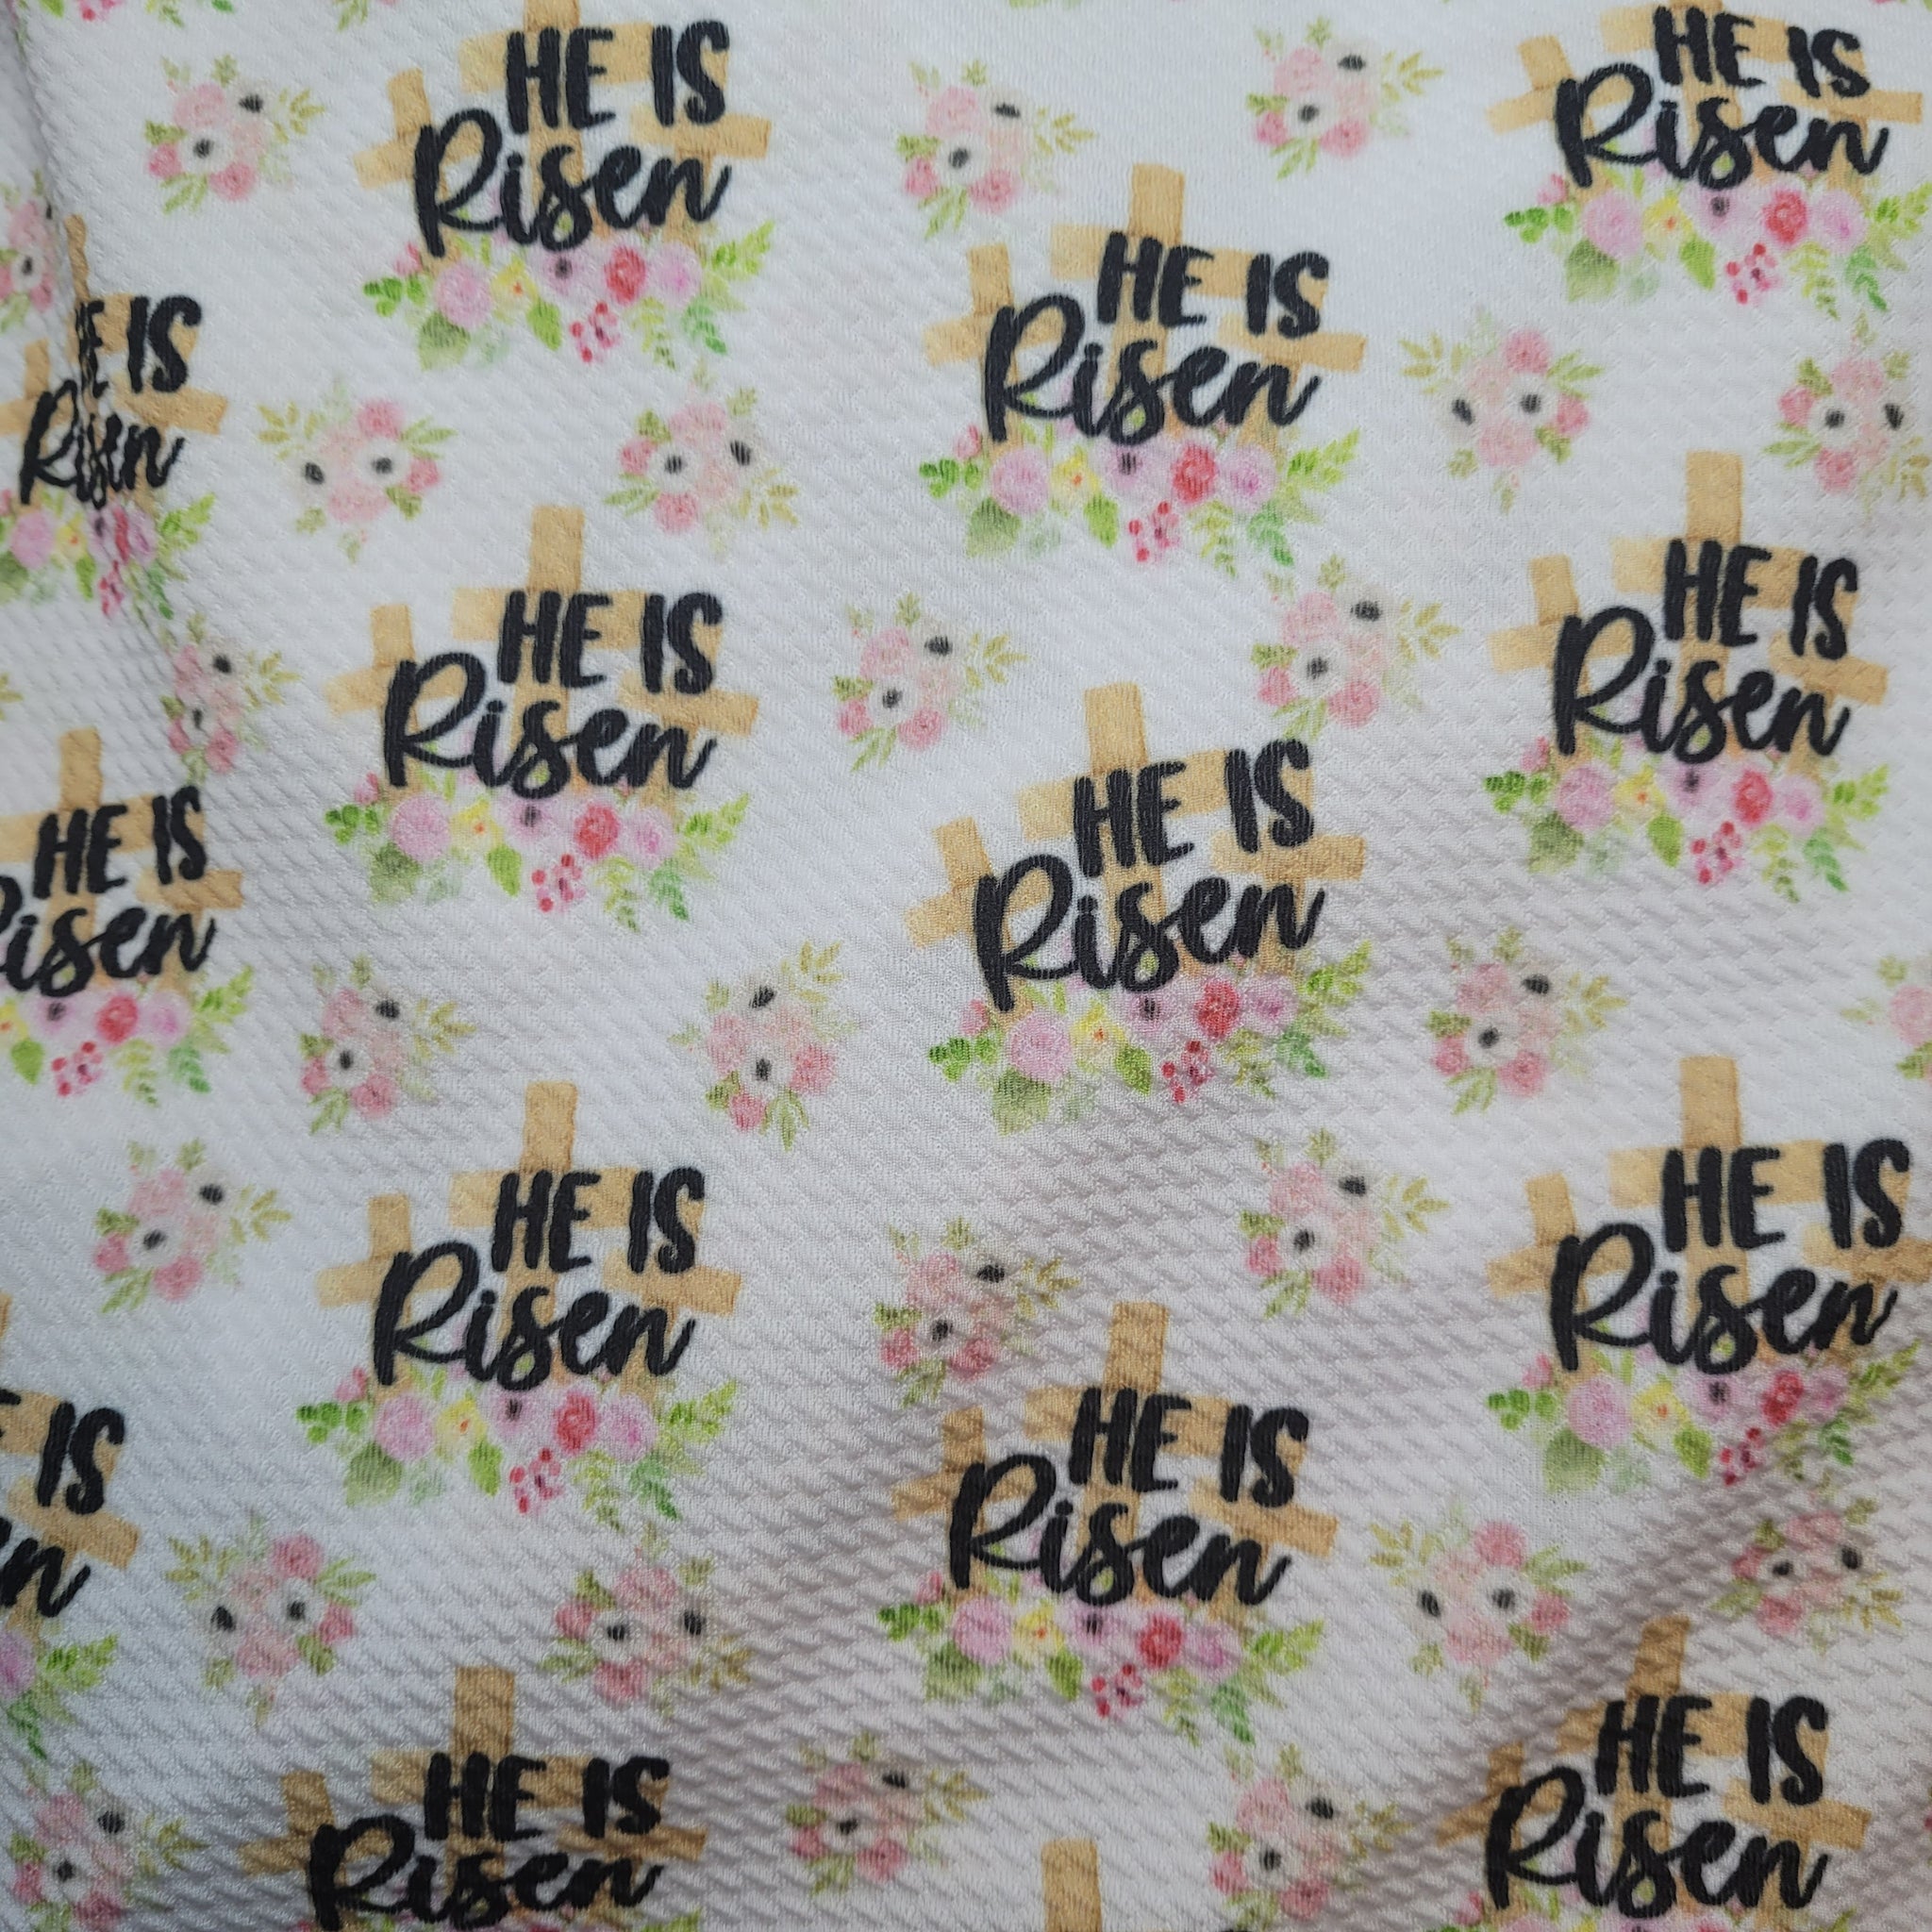 He is risen Fabric TODDLER/CHILD (18/24m - 6T) Bummie, Bummie Skirt, Shorts, Leggings or Joggers